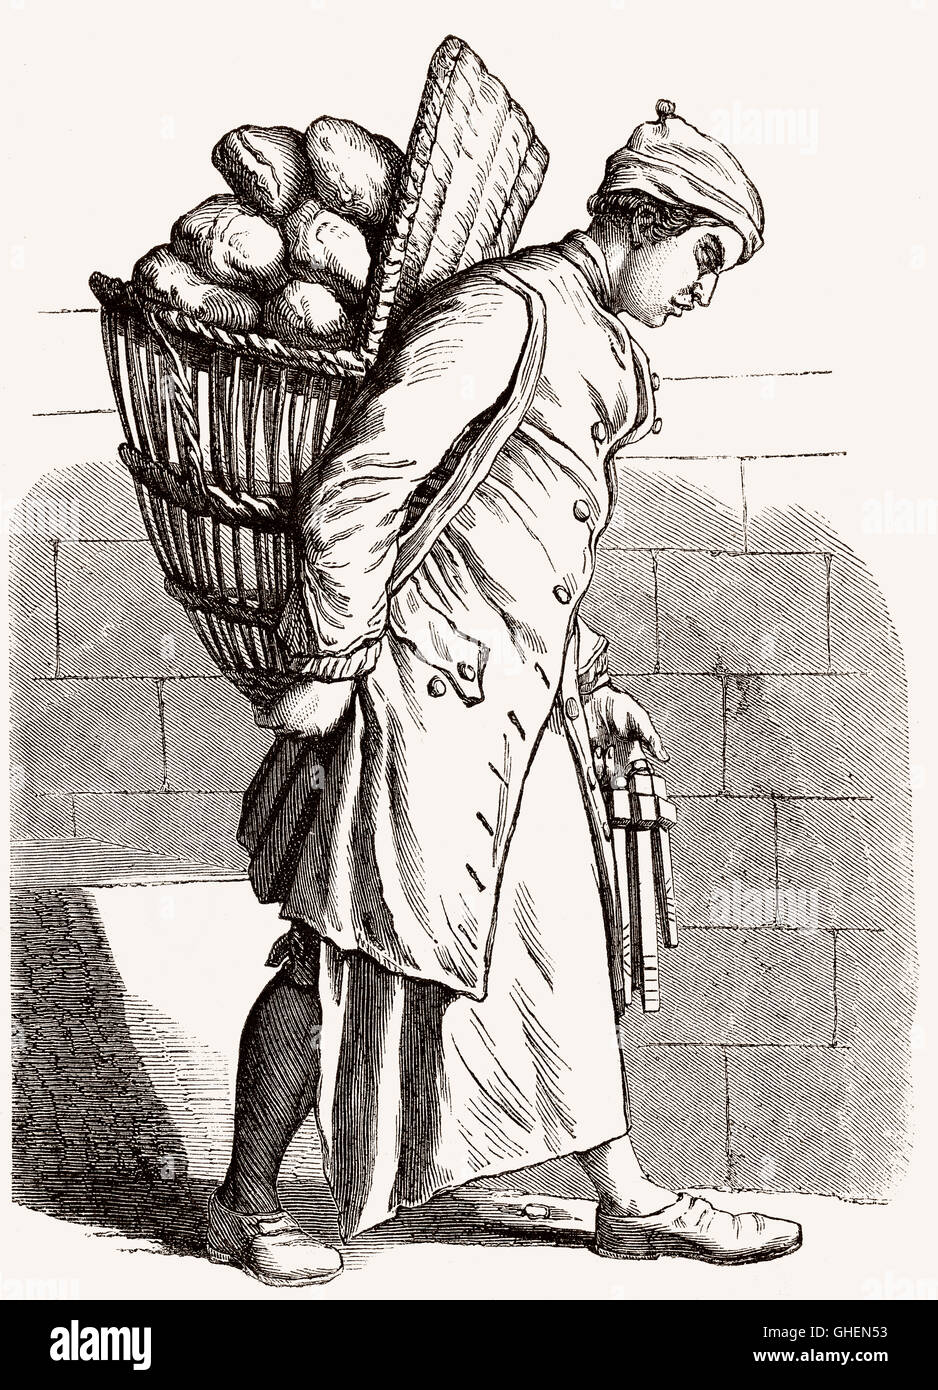 A baker in the 18th century Stock Photo